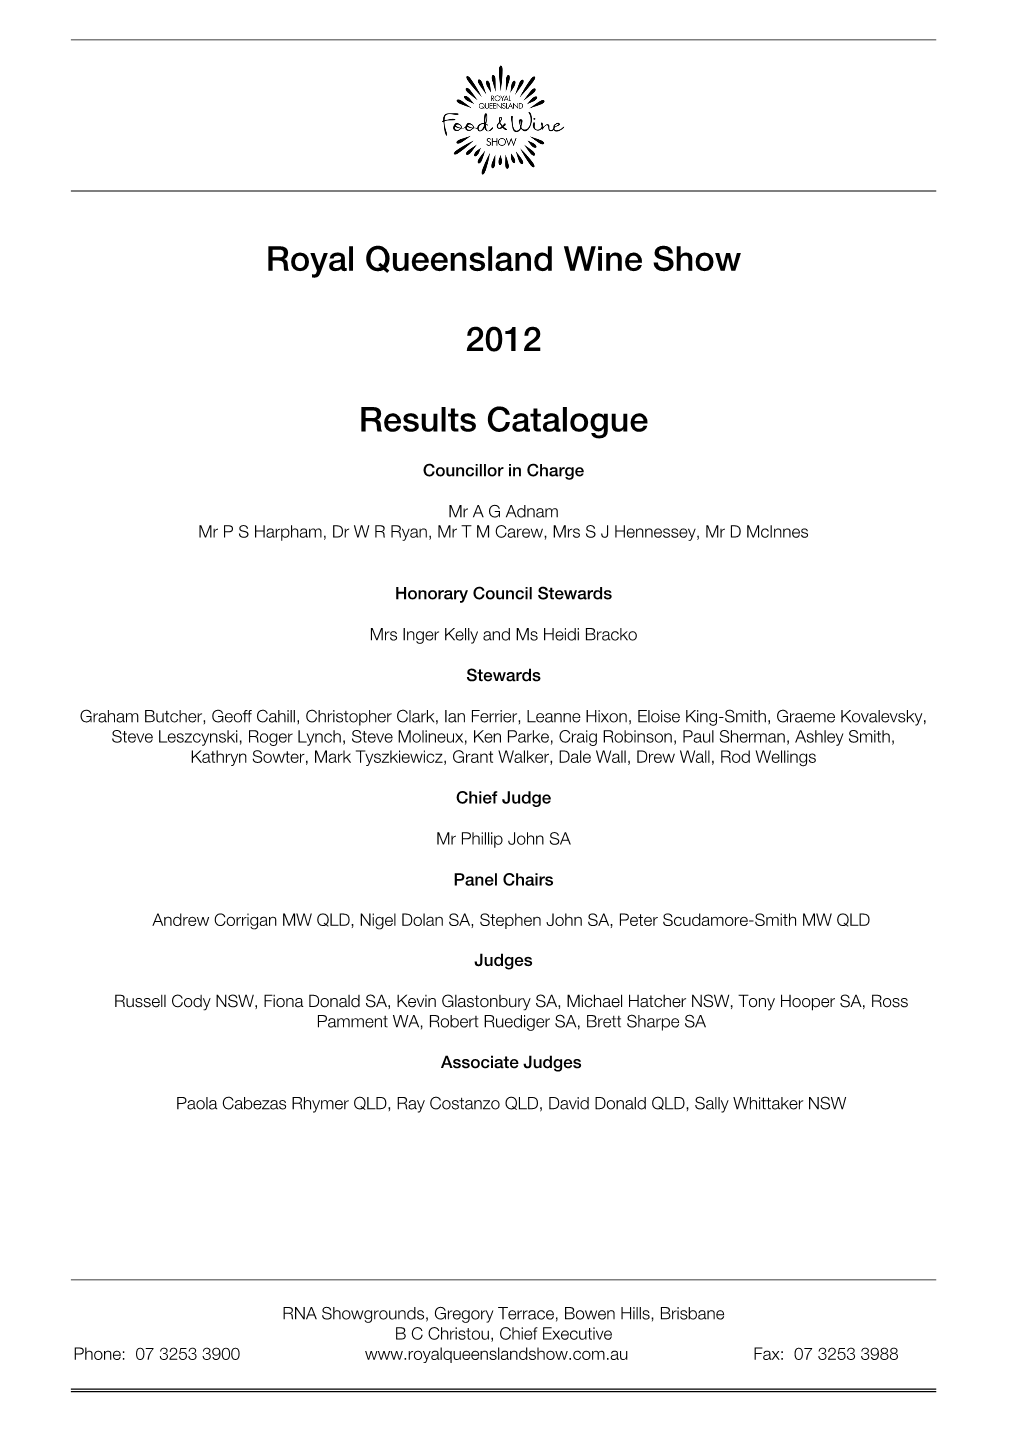 Royal Queensland Wine Show 2012 Results Catalogue